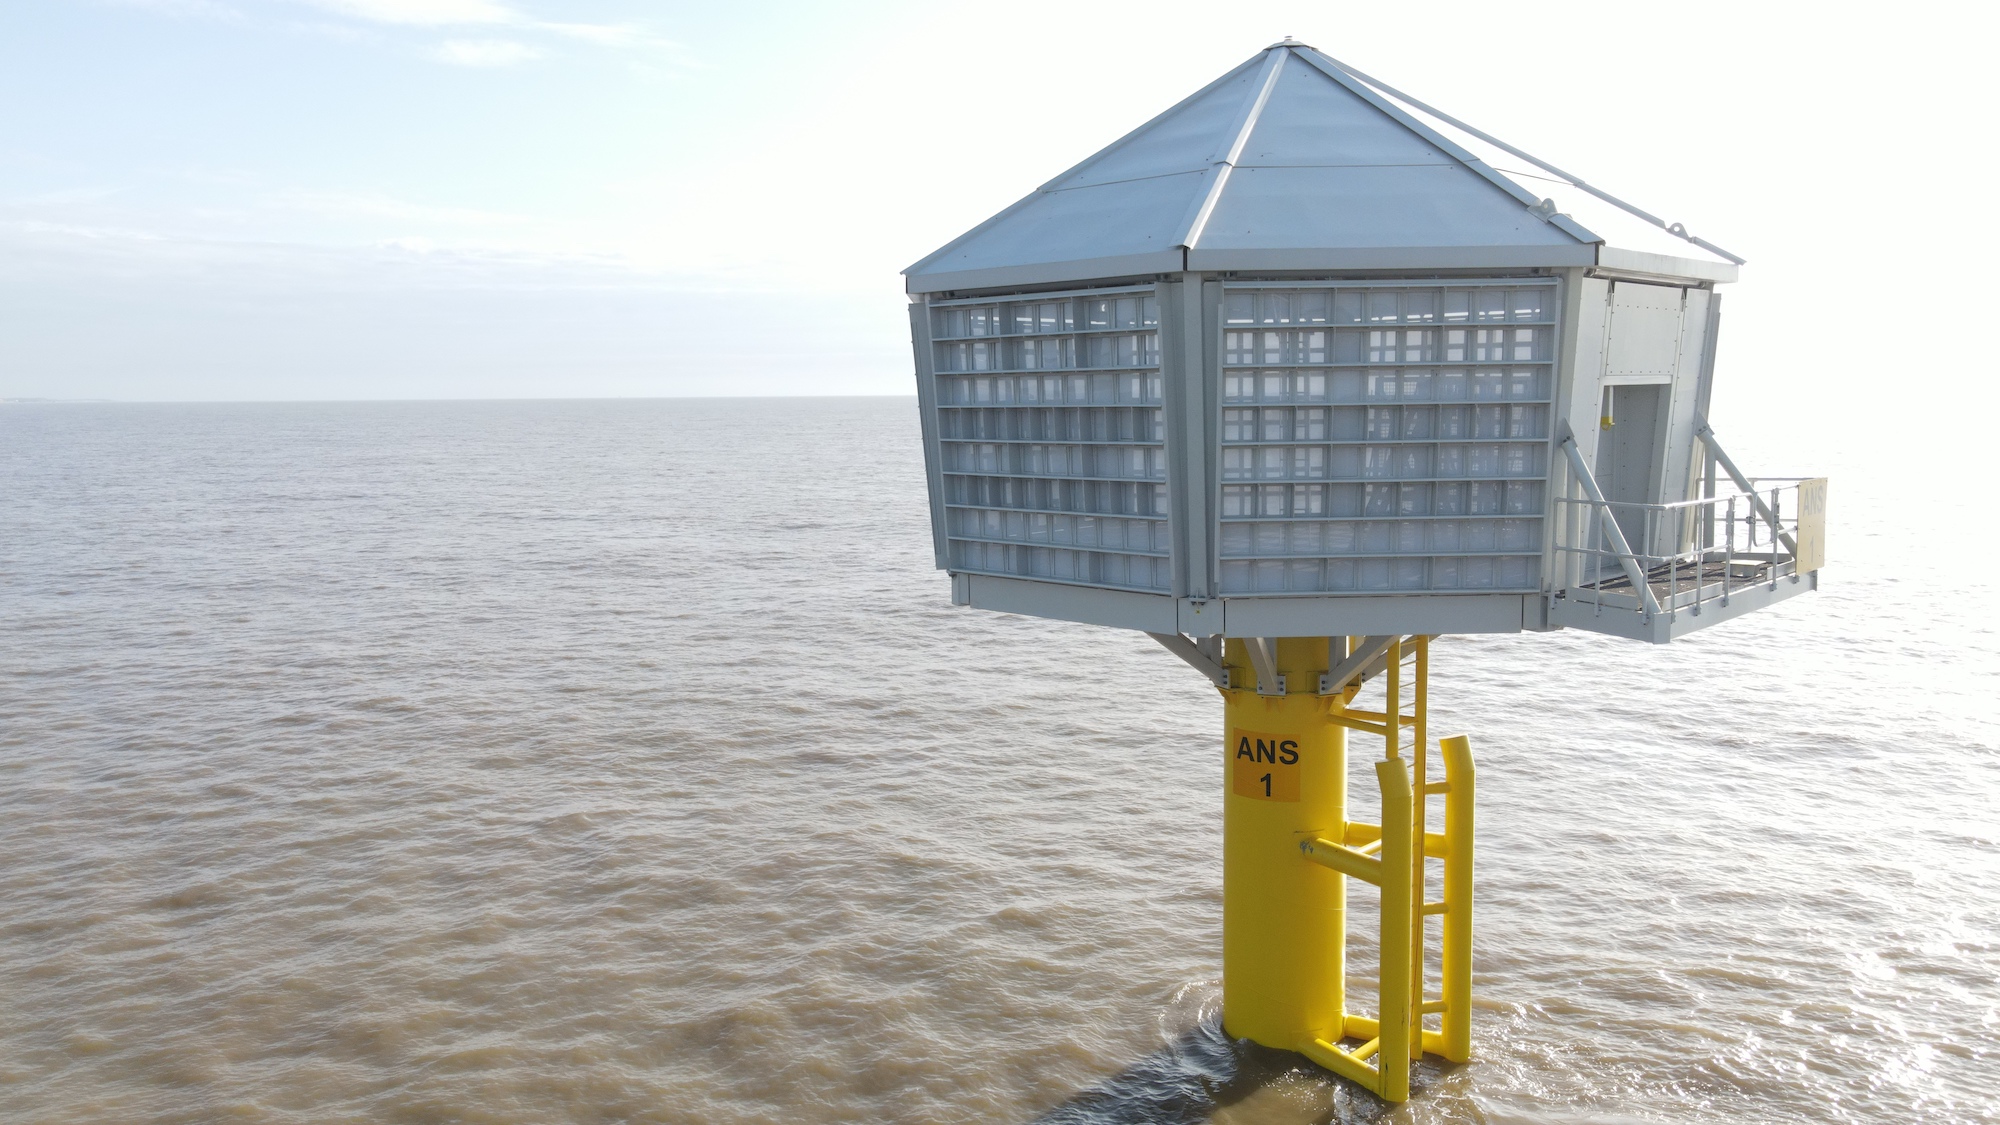 Artificial nests could give endangered birds a home near new offshore wind farm